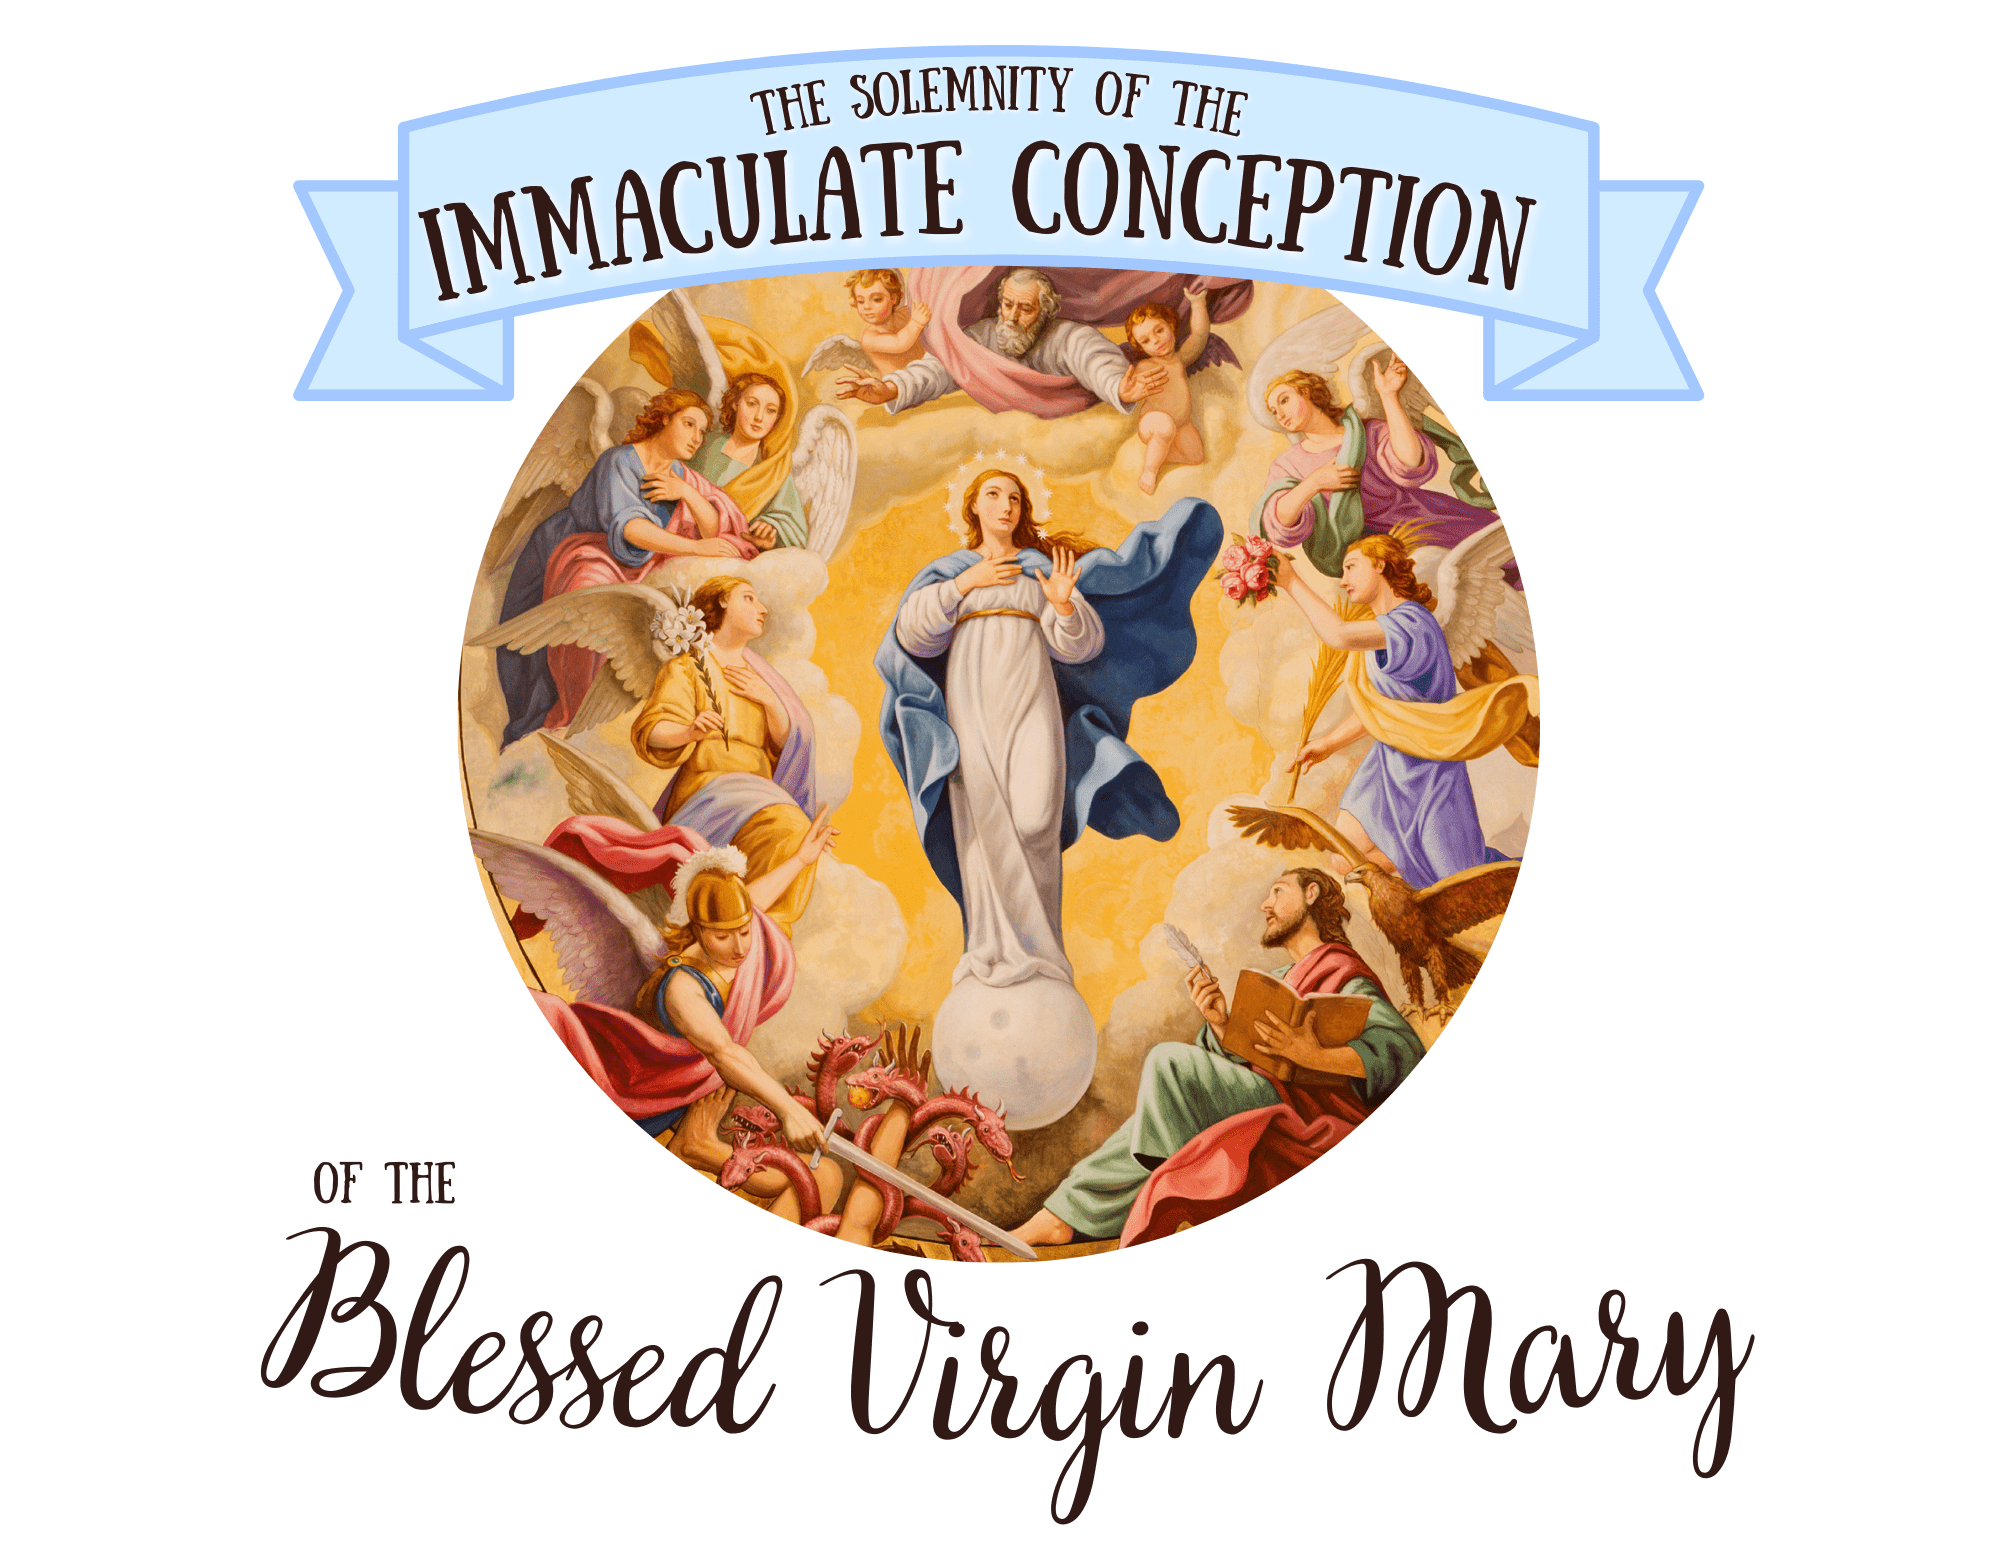 Solemnity of the Immaculate Conception of the Blessed Virgin Mary